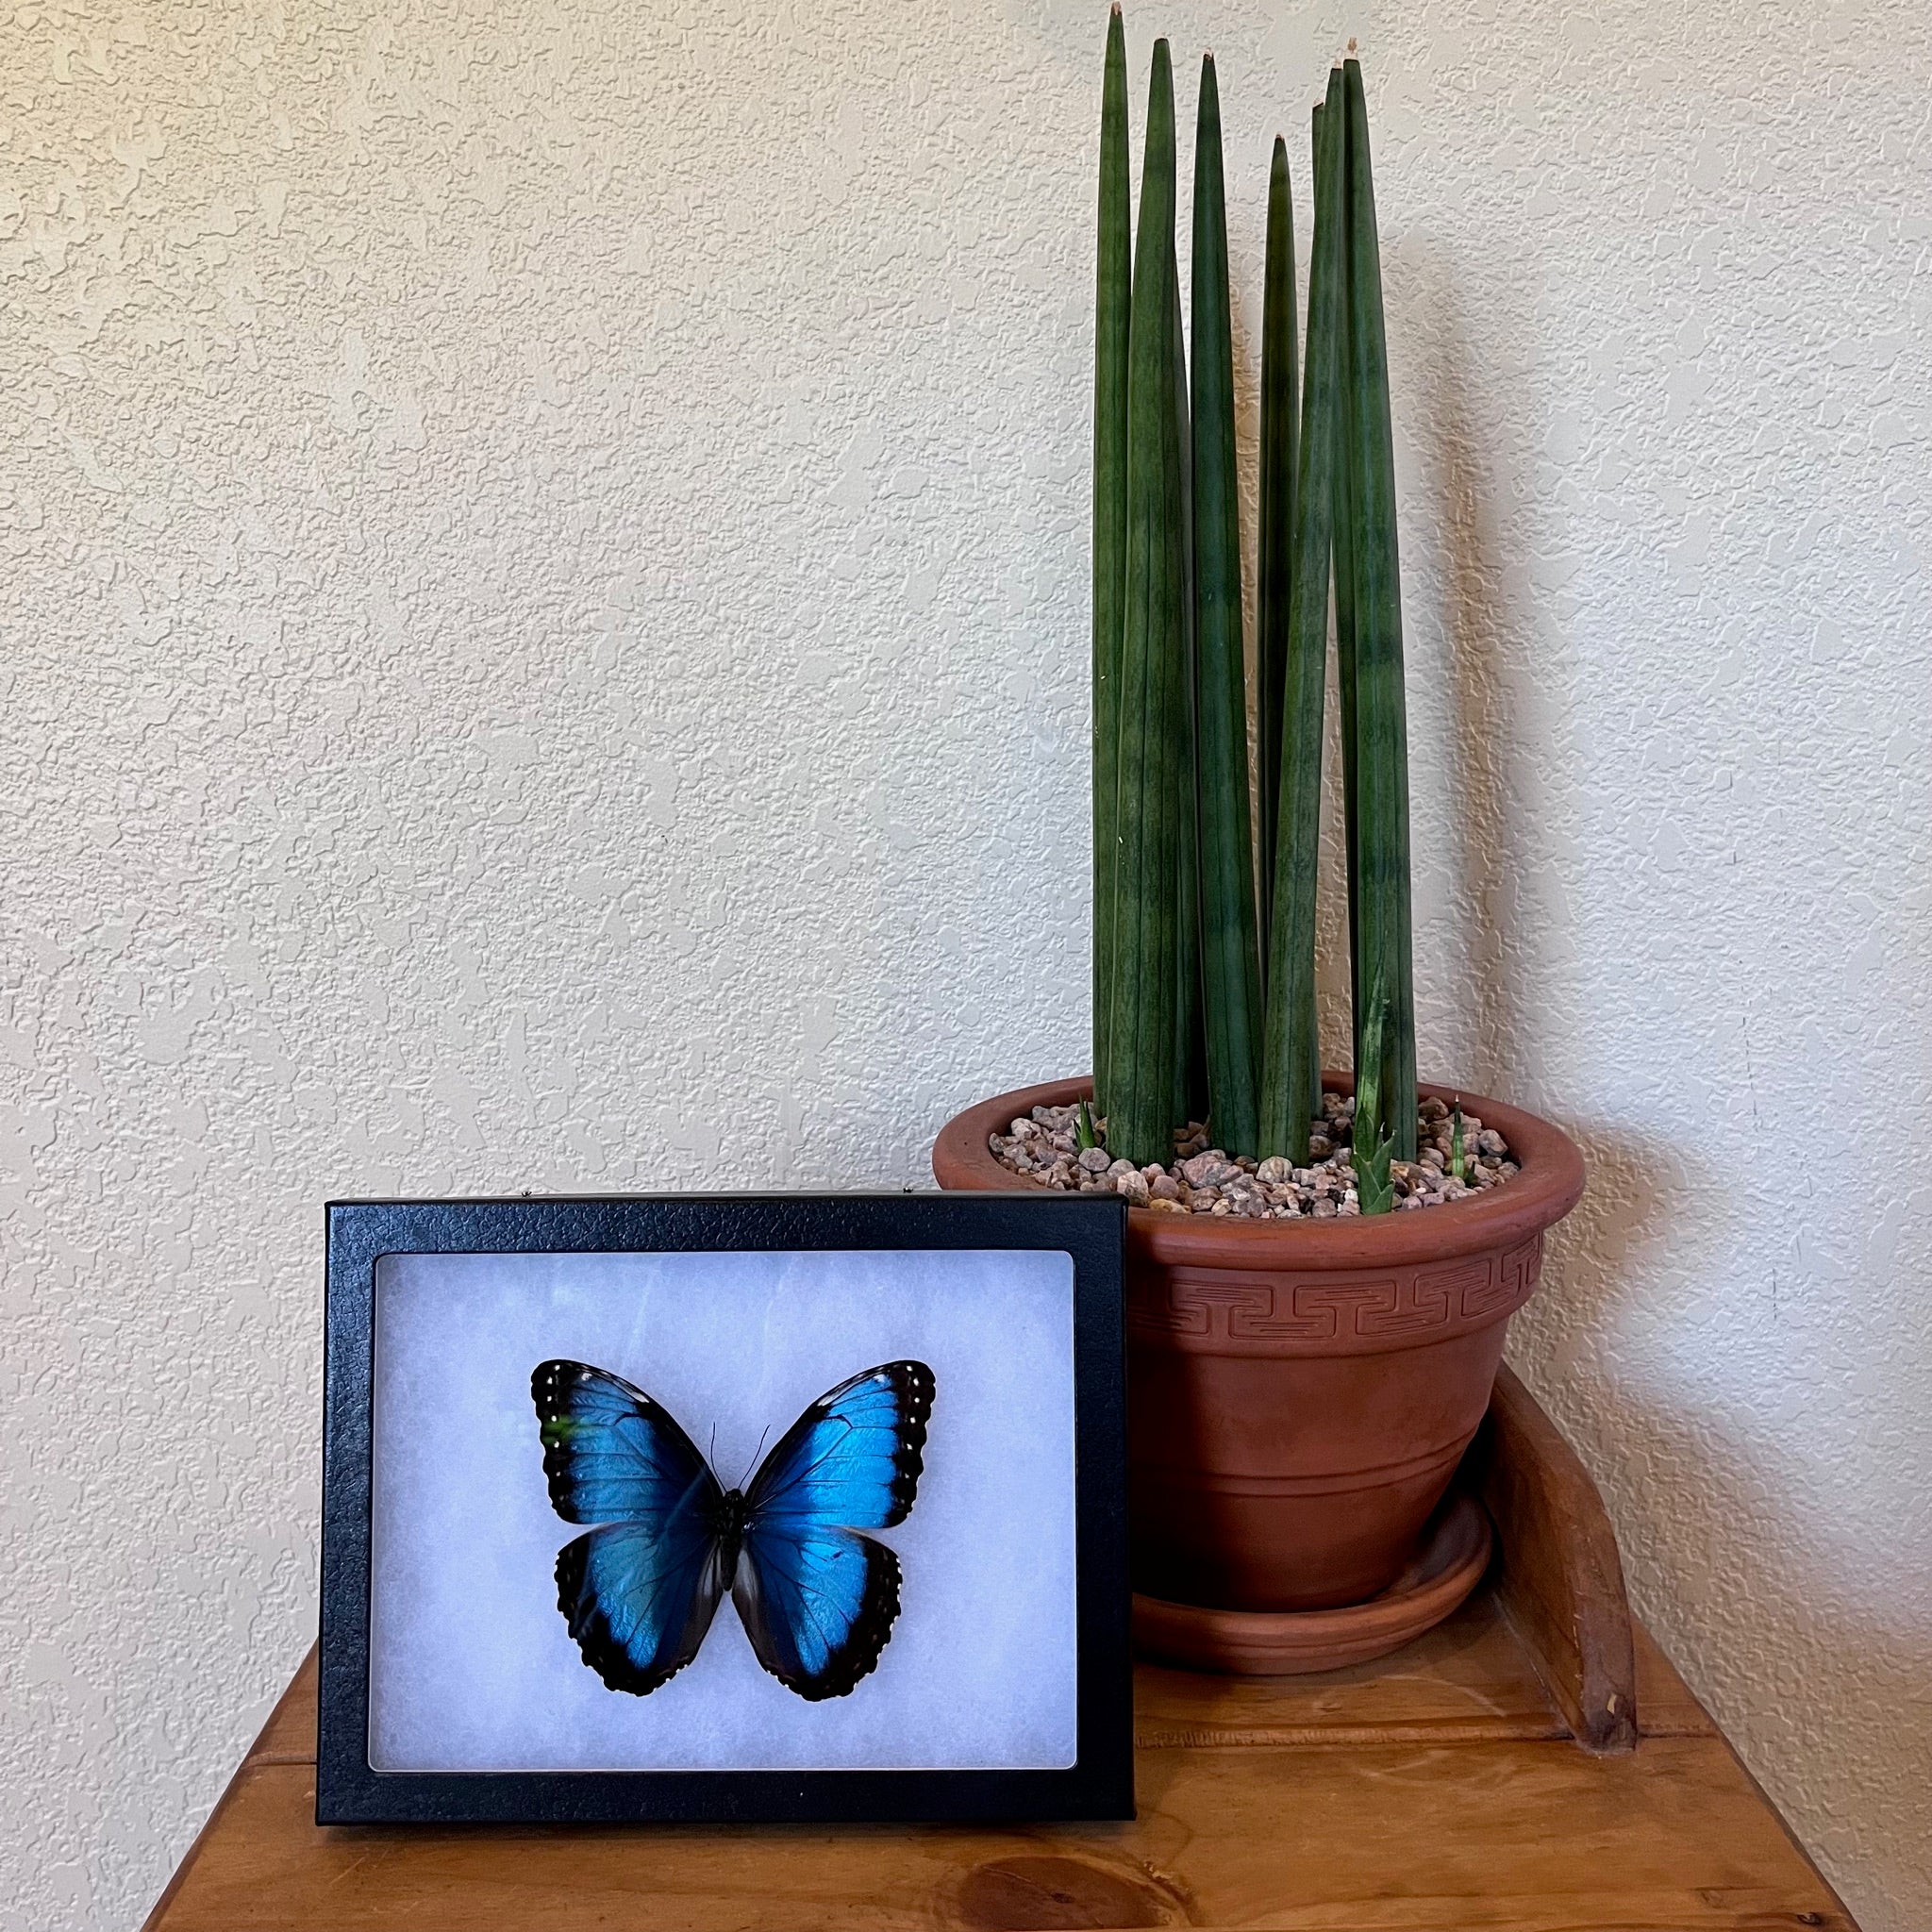 Riker Mount Frames for Insects, Butterflies, Beetles, Collectibles